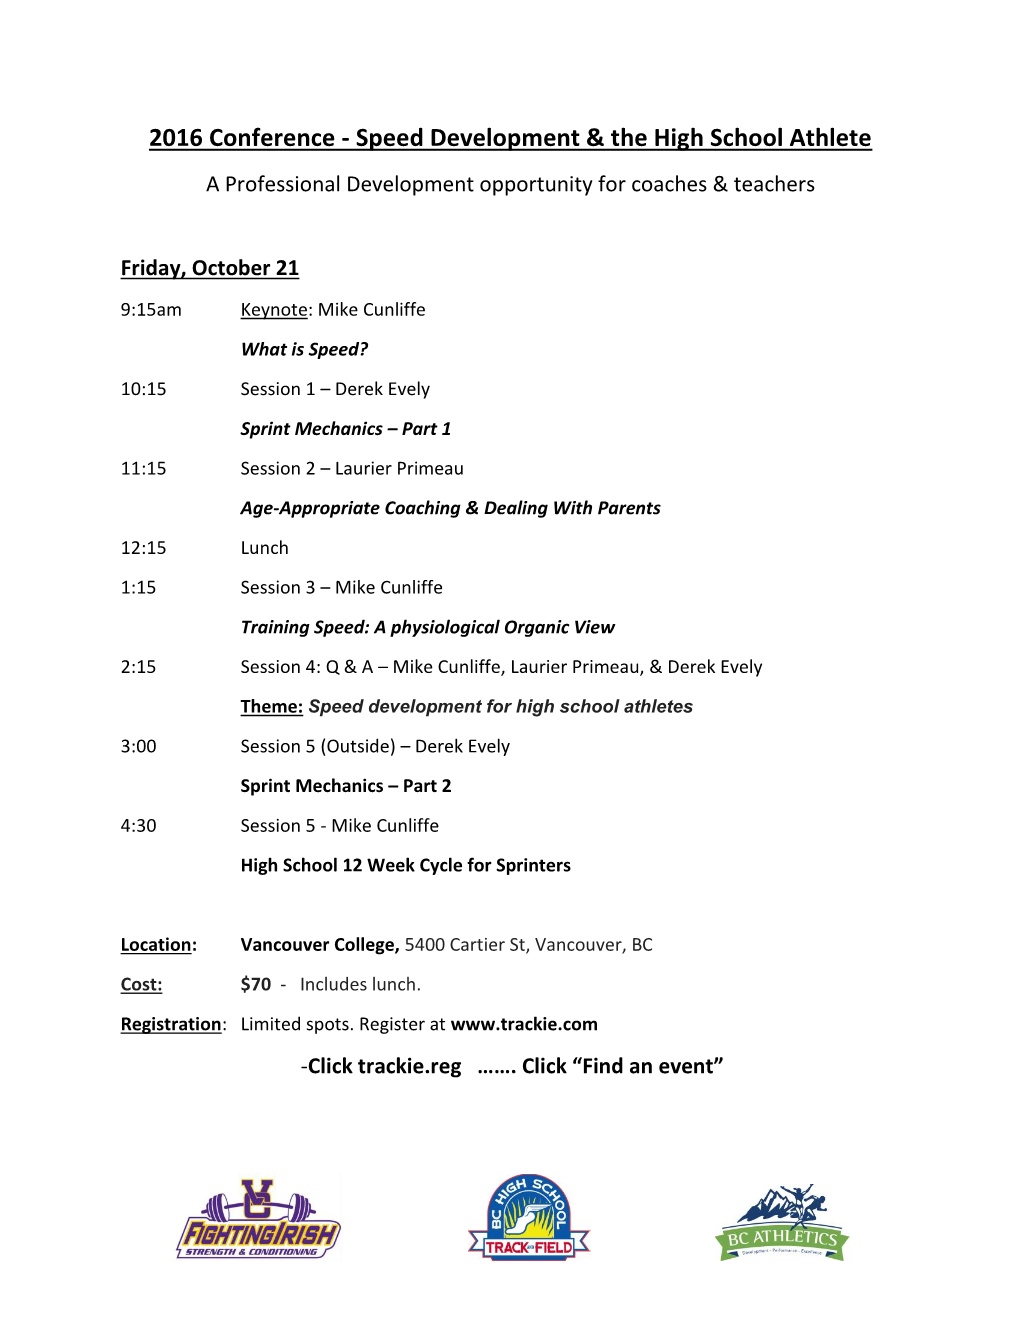 2016 Conference - Speed Development & the High School Athlete a Professional Development Opportunity for Coaches & Teachers